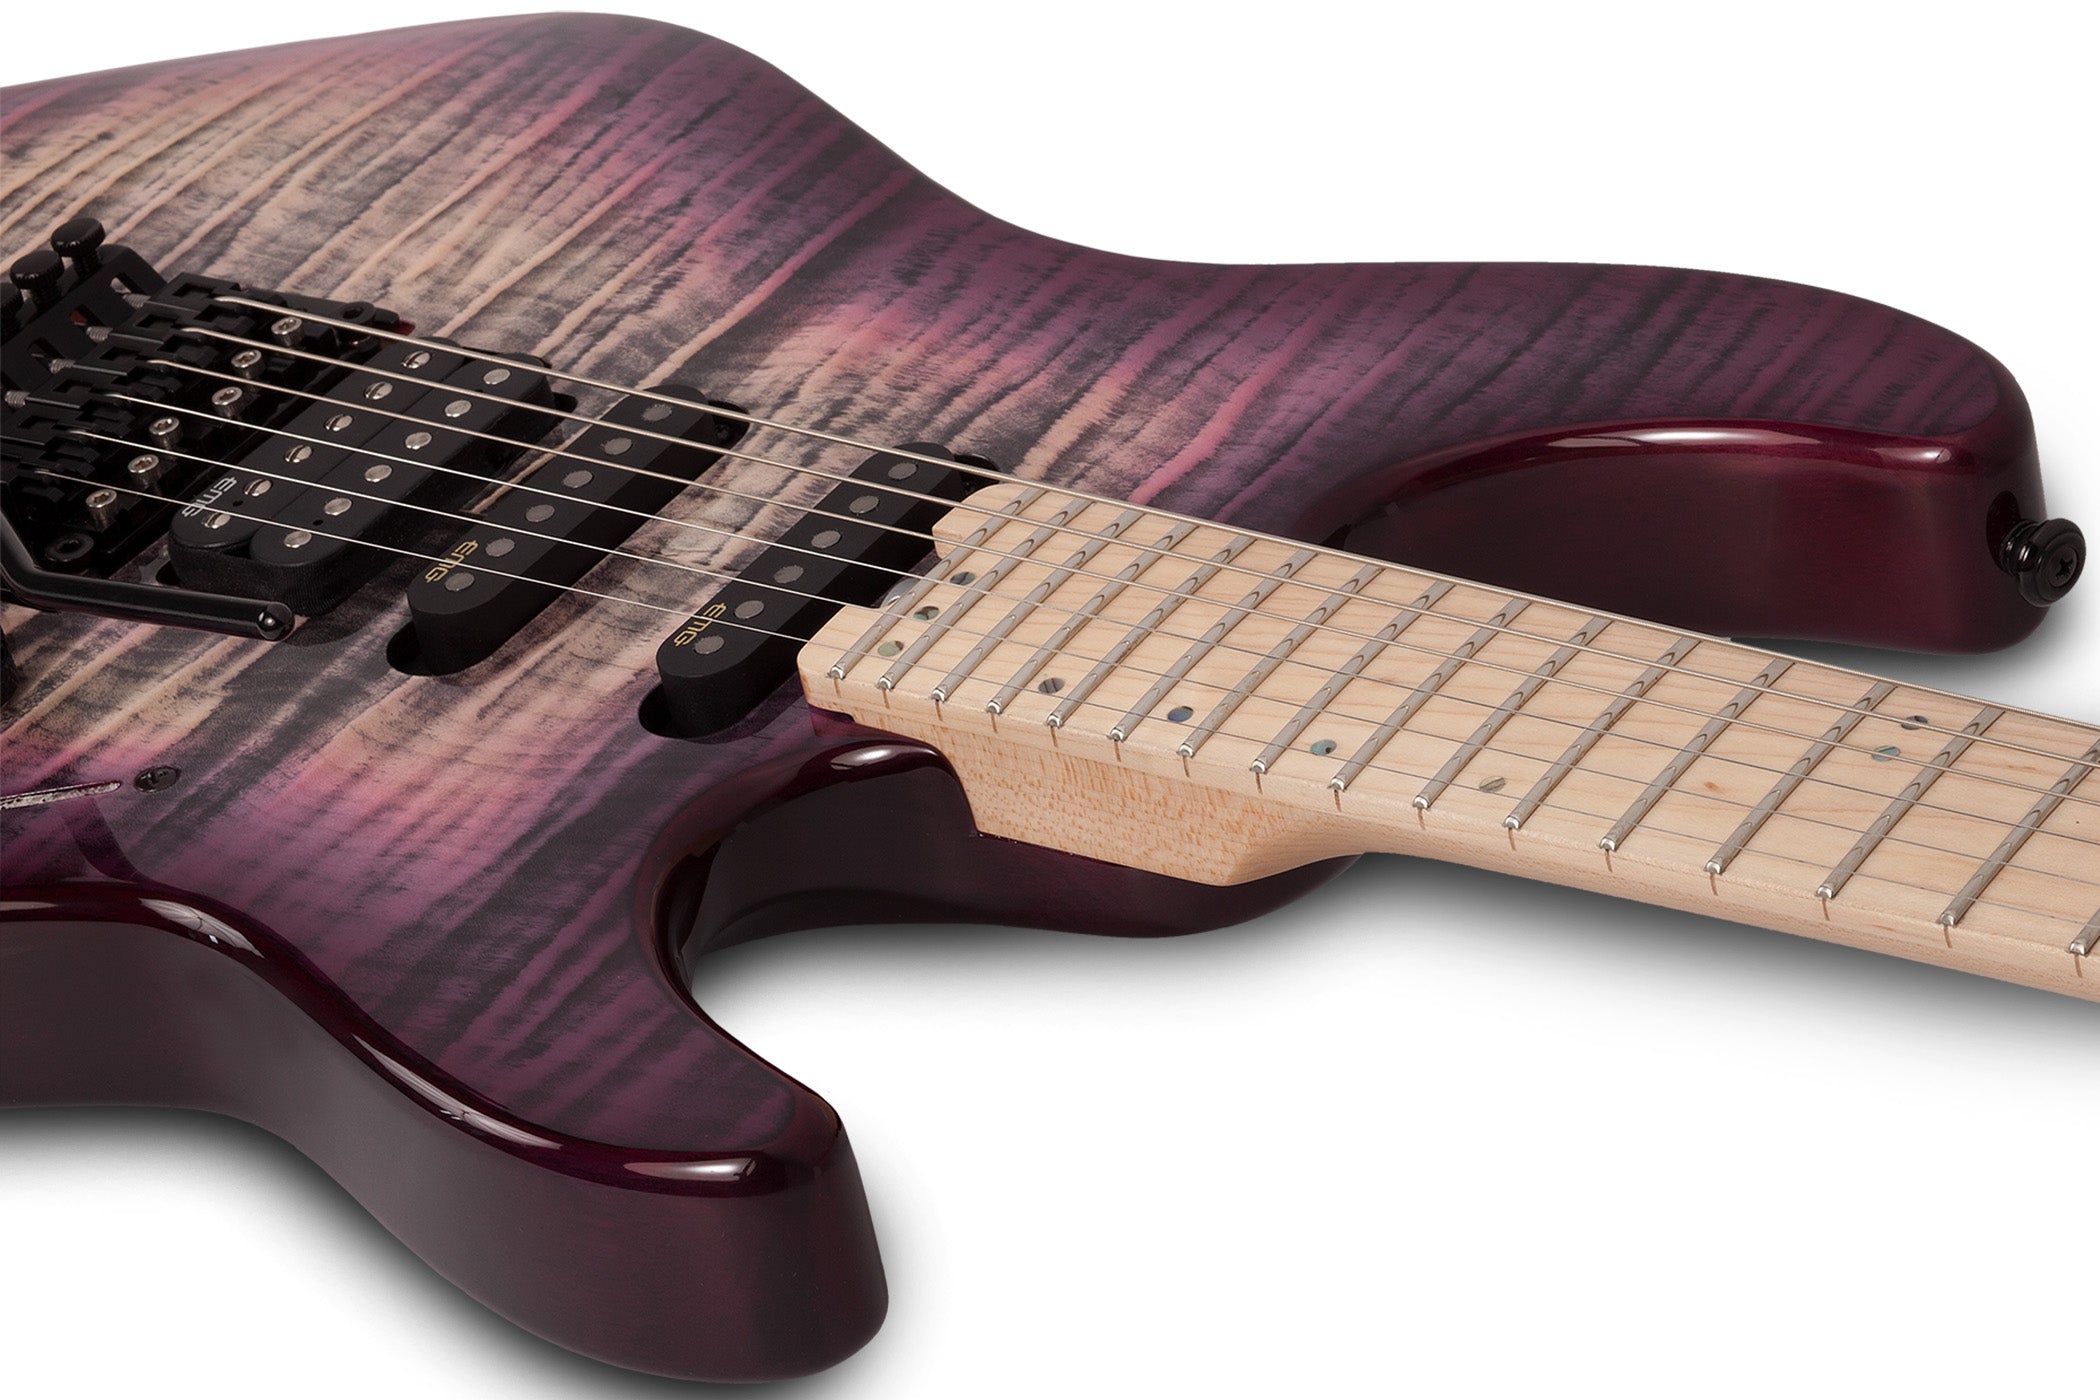 SCHECTER SUN VALLEY SUPER SHREDDER III FR ELECTRIC GUITAR AURORA BURST COLOR (1276) MADE IN INDONESIA, SCHECTER, ELECTRIC GUITAR, schecter-electric-guitar-sunvalley-ss-fr-ab, ZOSO MUSIC SDN BHD